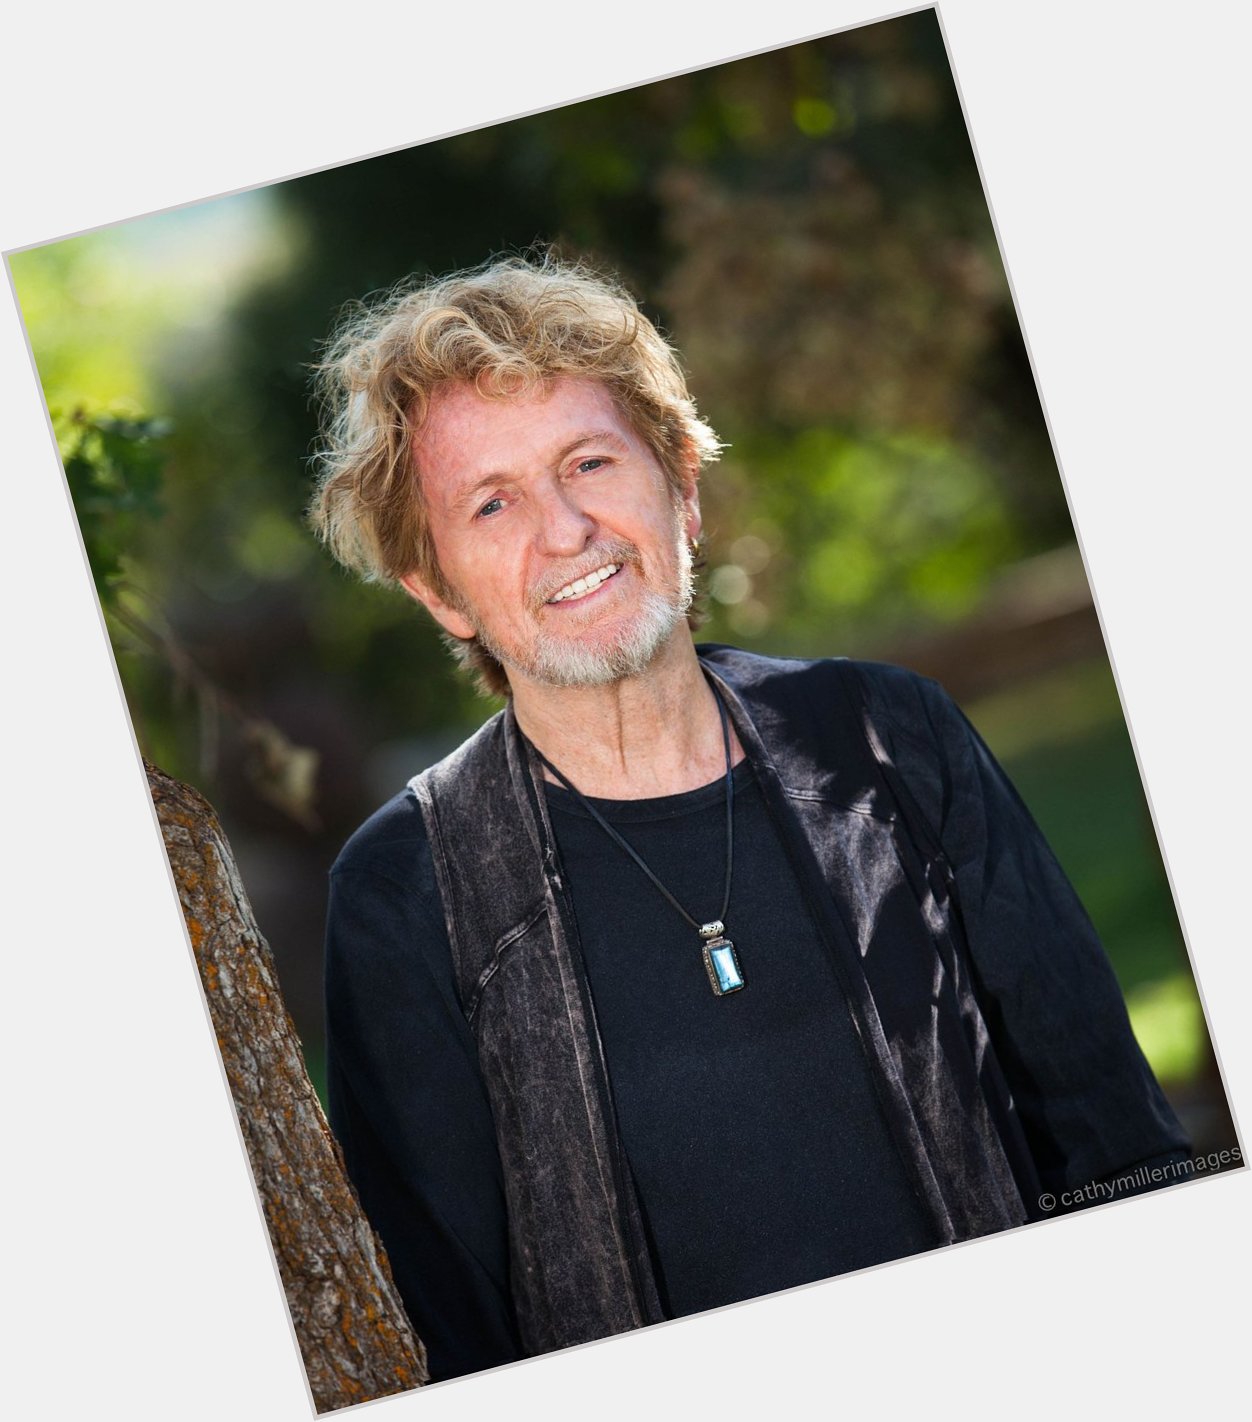 Happy 77th Birthday to the most unique voice in rock history.
The great Jon Anderson 